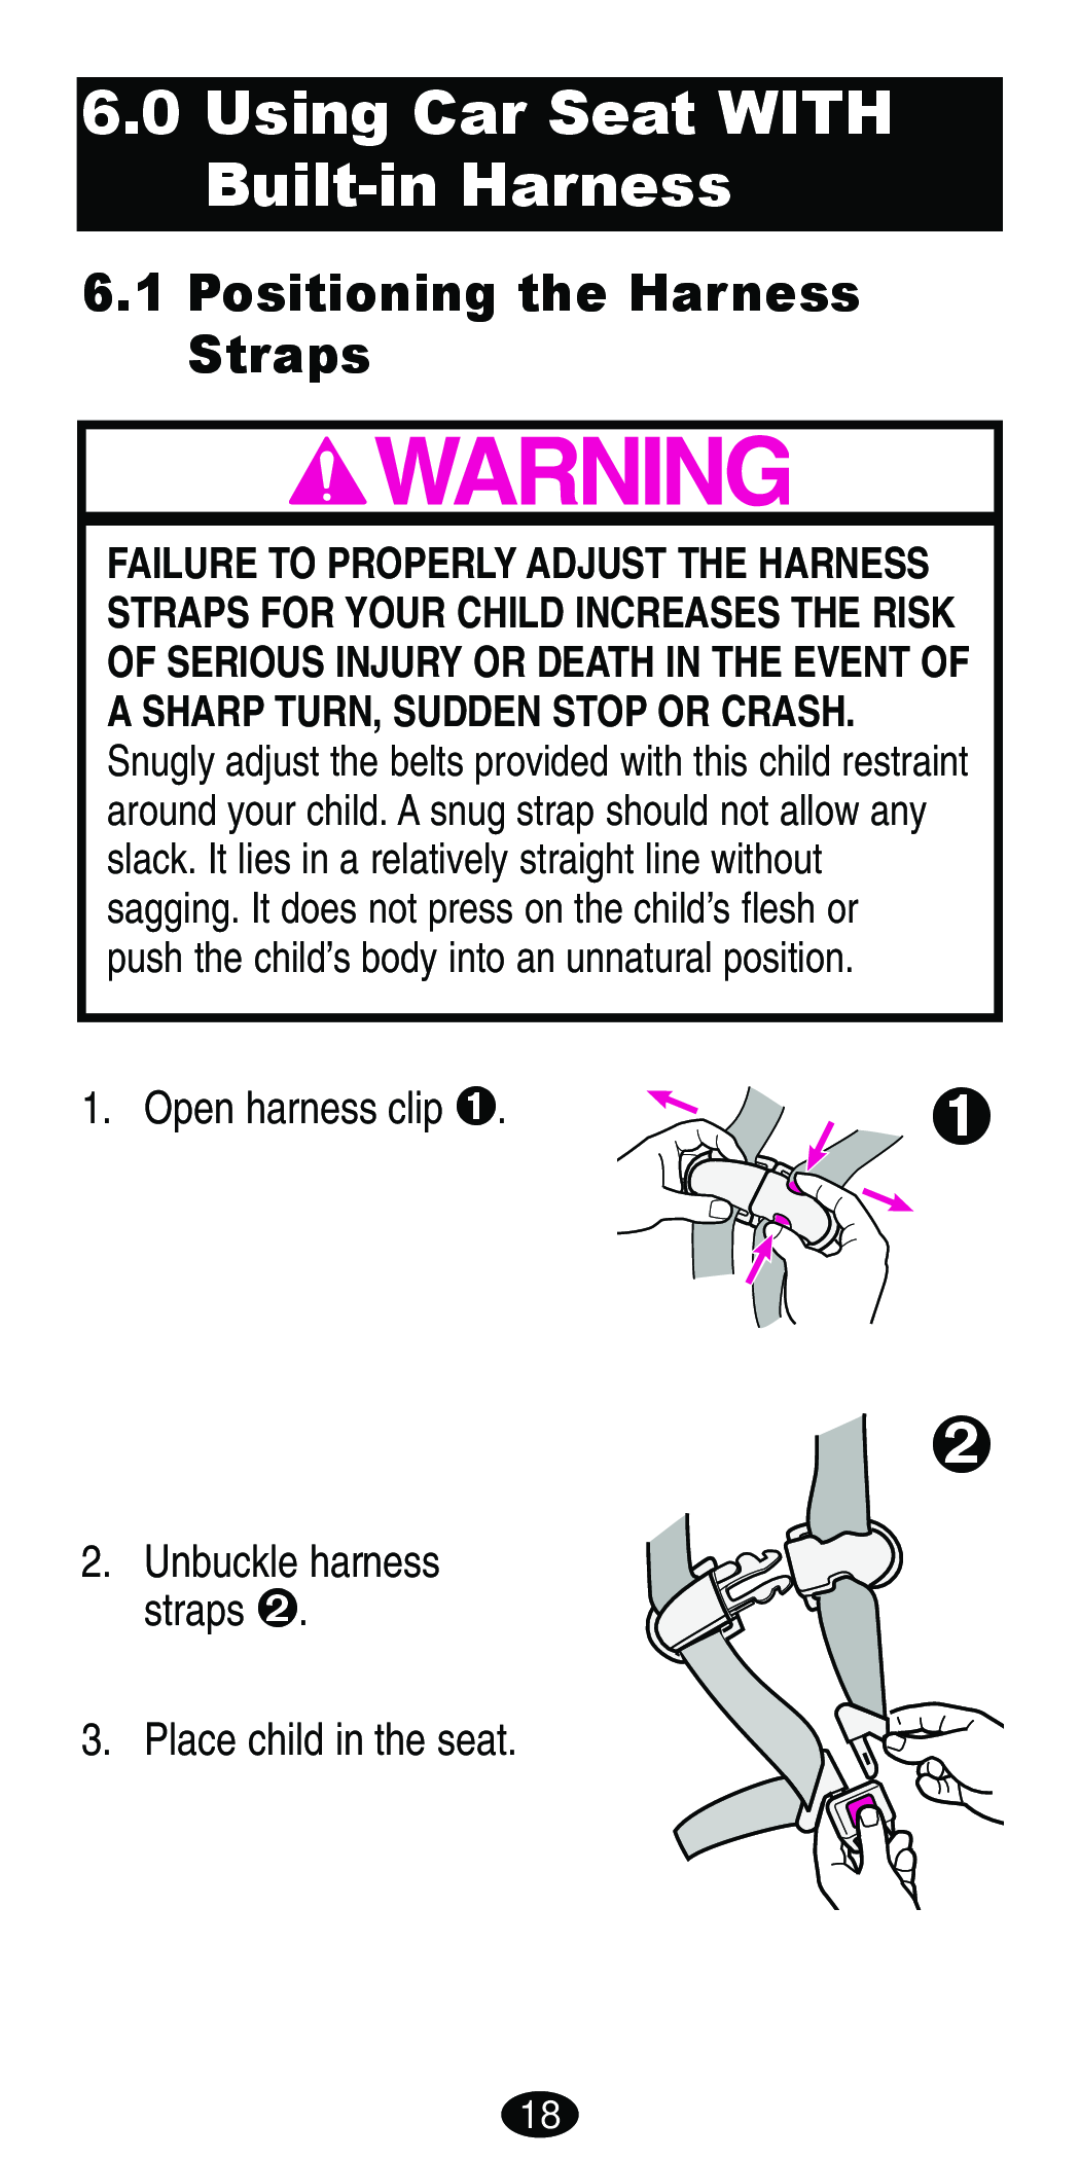 Graco Car Seat/Booster manual Using Car Seat WITH Built-in Harness, Positioning the Harness Straps, Open harness clip ™ 